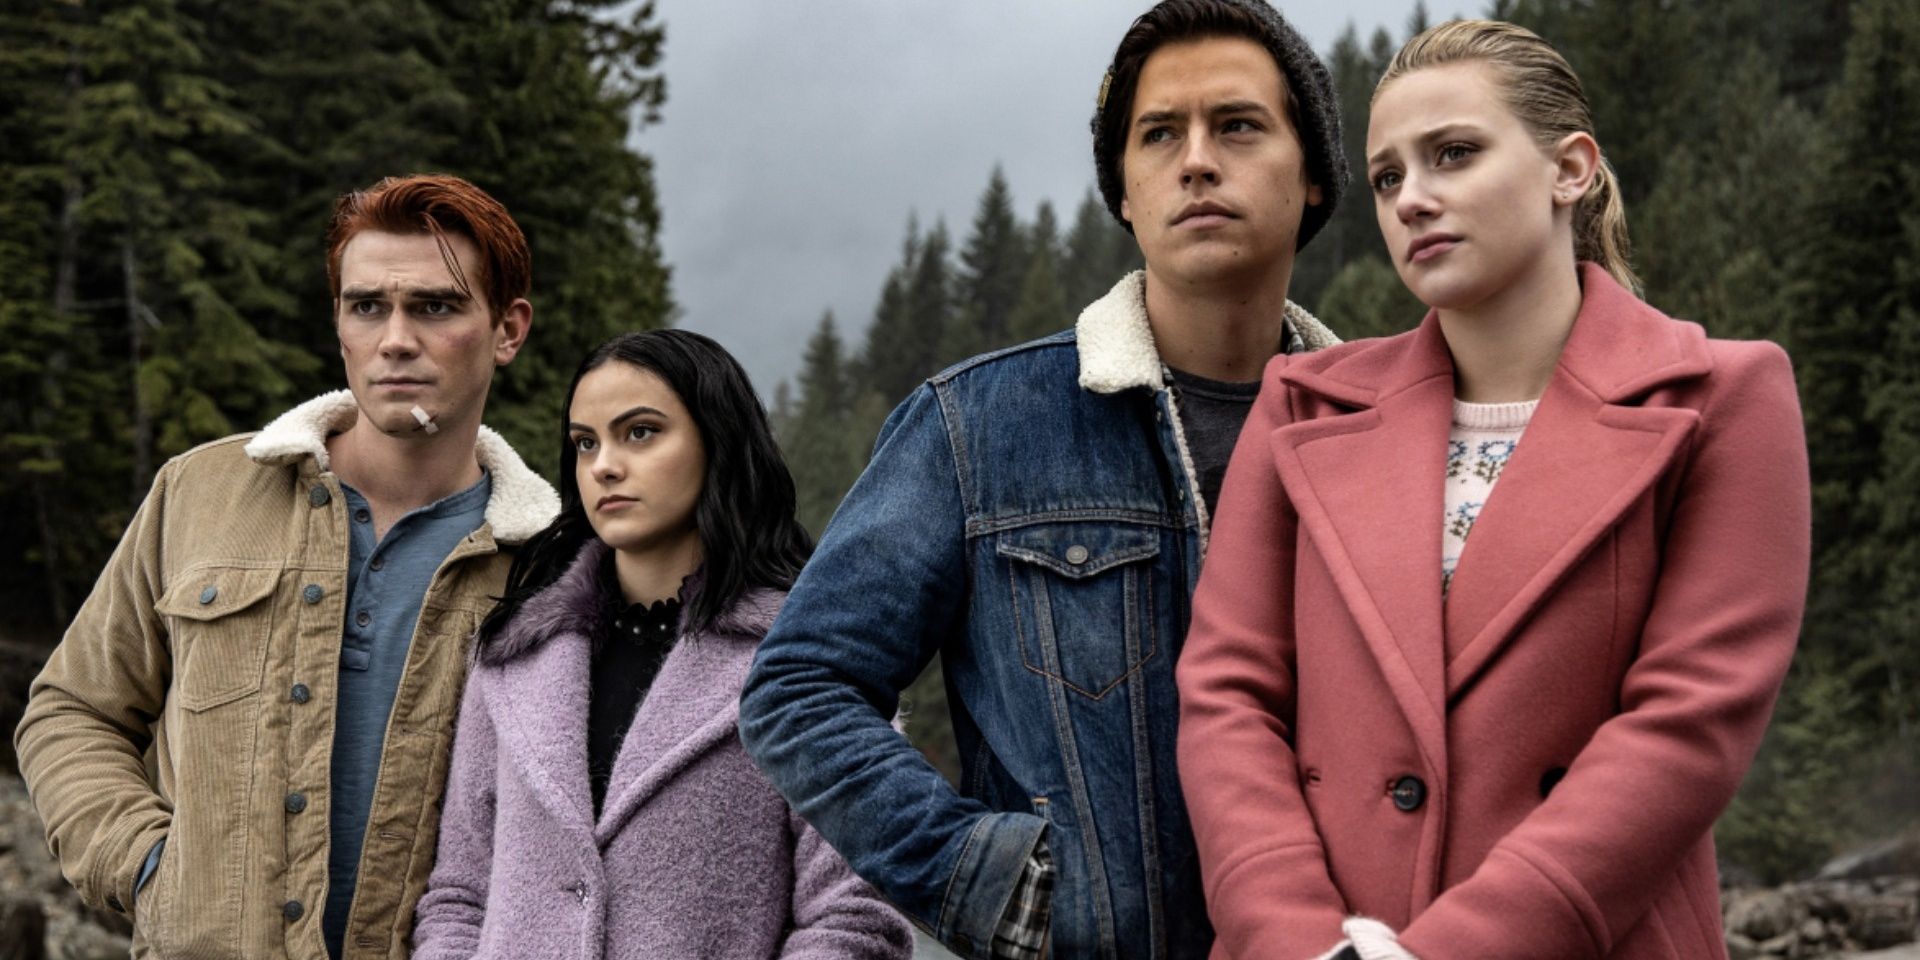 Teenagers standing in a forest in Riverdale 